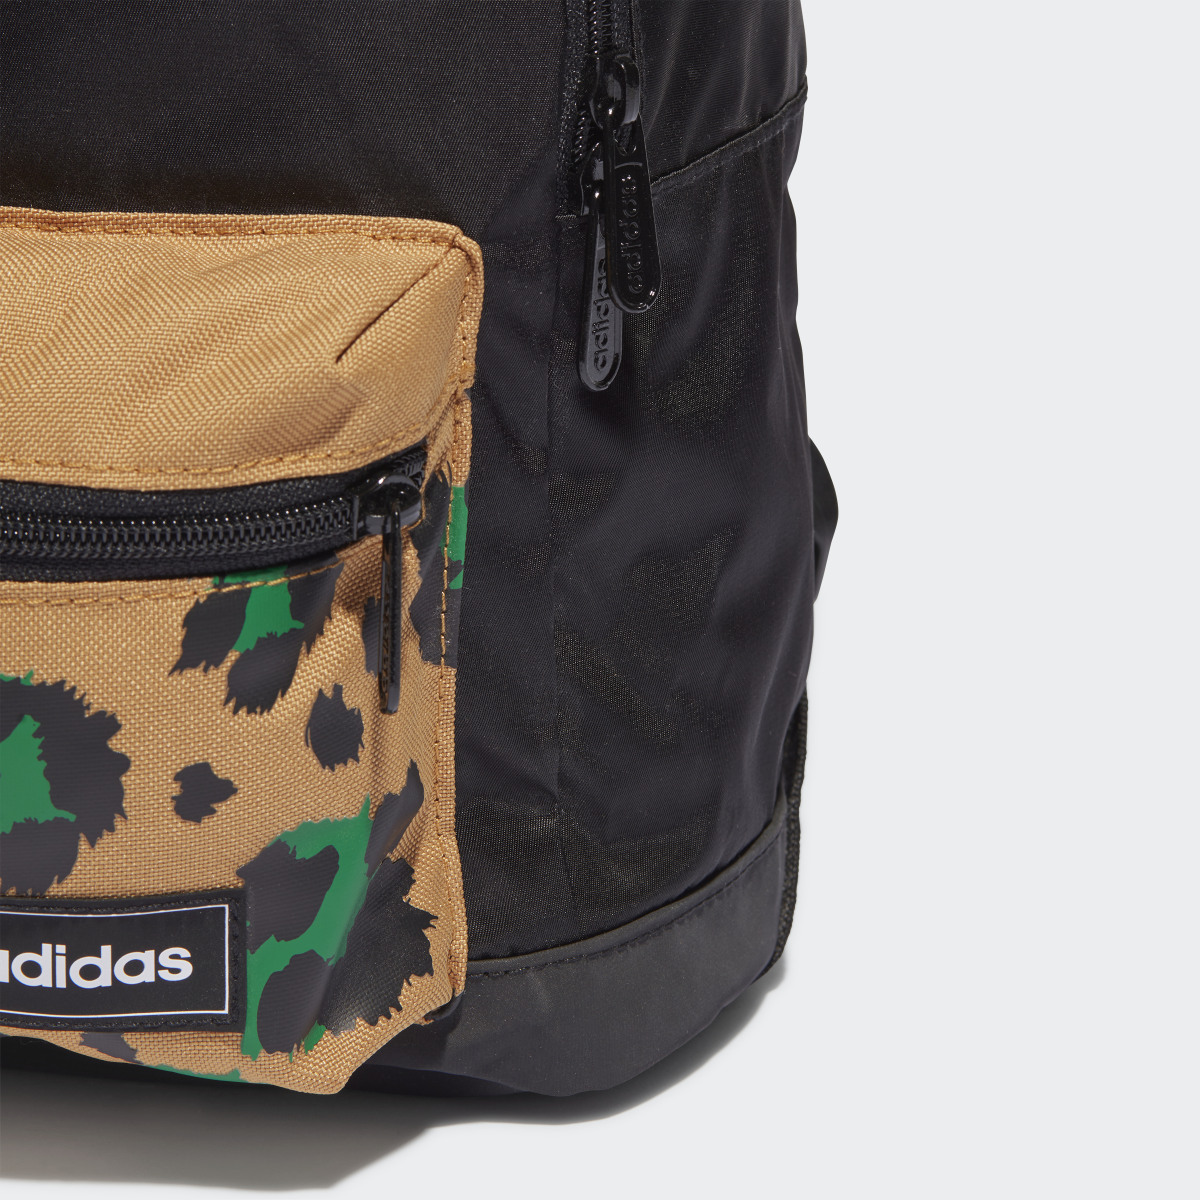 Adidas T4H XS Backpack. 6